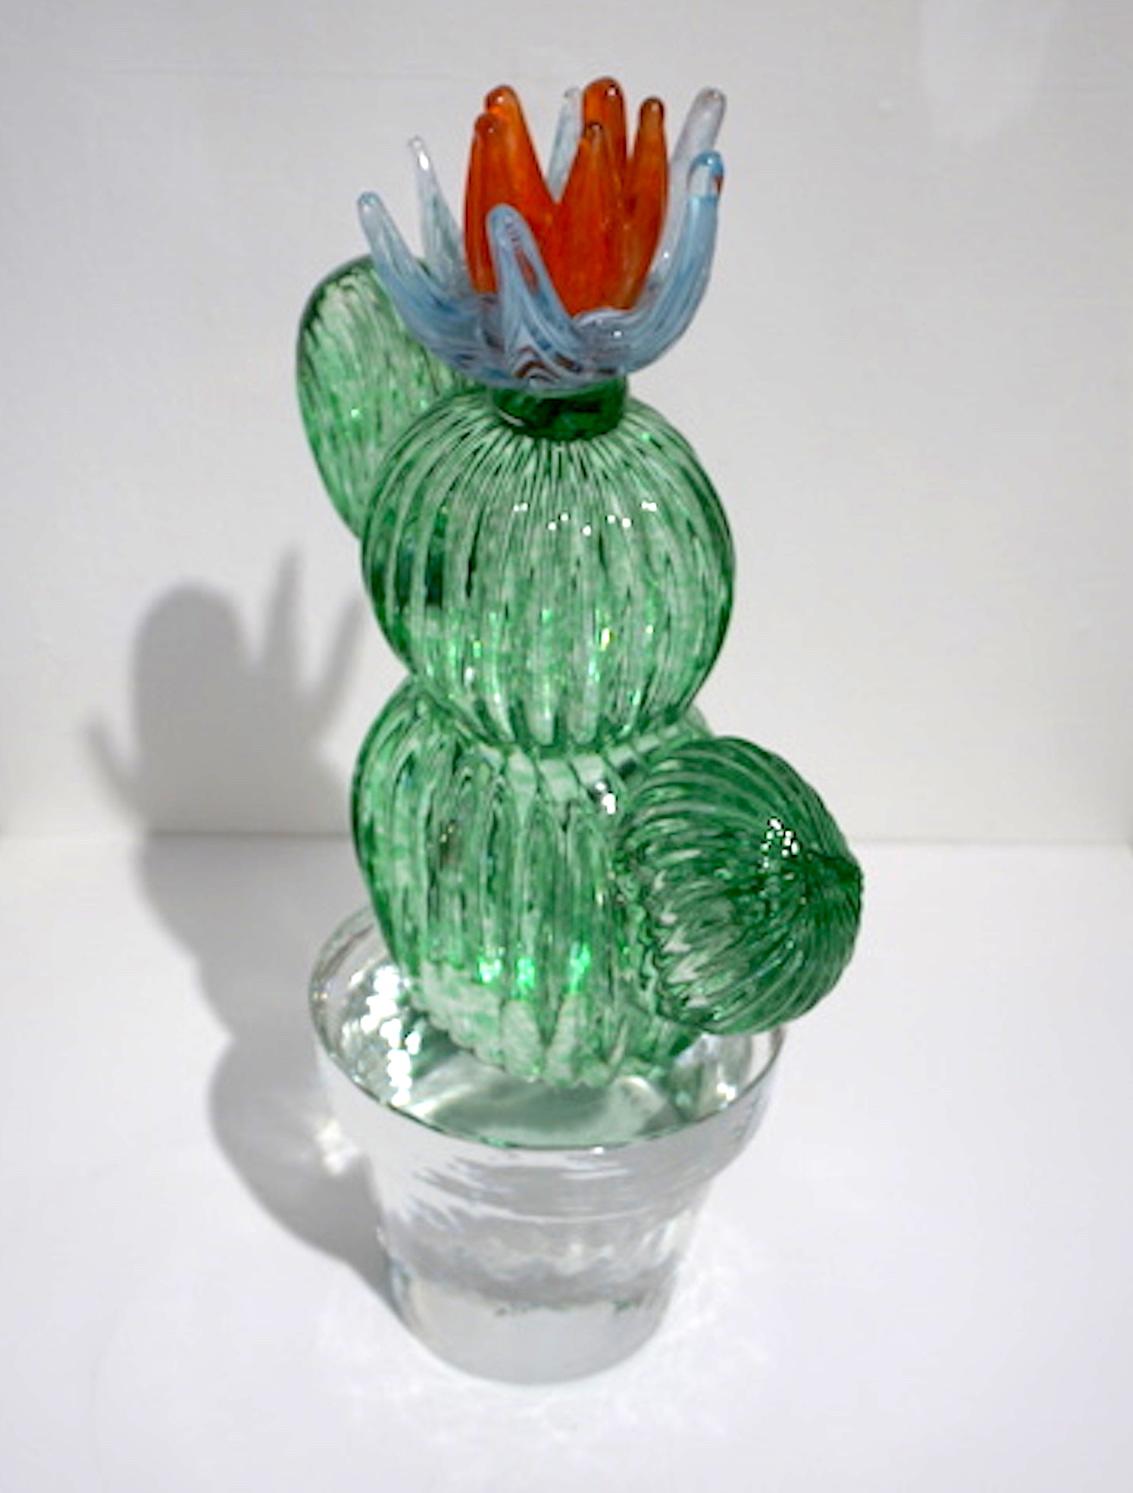 1990s Italian highly collectible cactus of limited edition, Modern Minimalist Design by Marta Marzotto, blown by Formia, in a lifelike organic shape in verdant light emerald green Murano glass with double corolla flower in light blue striated with